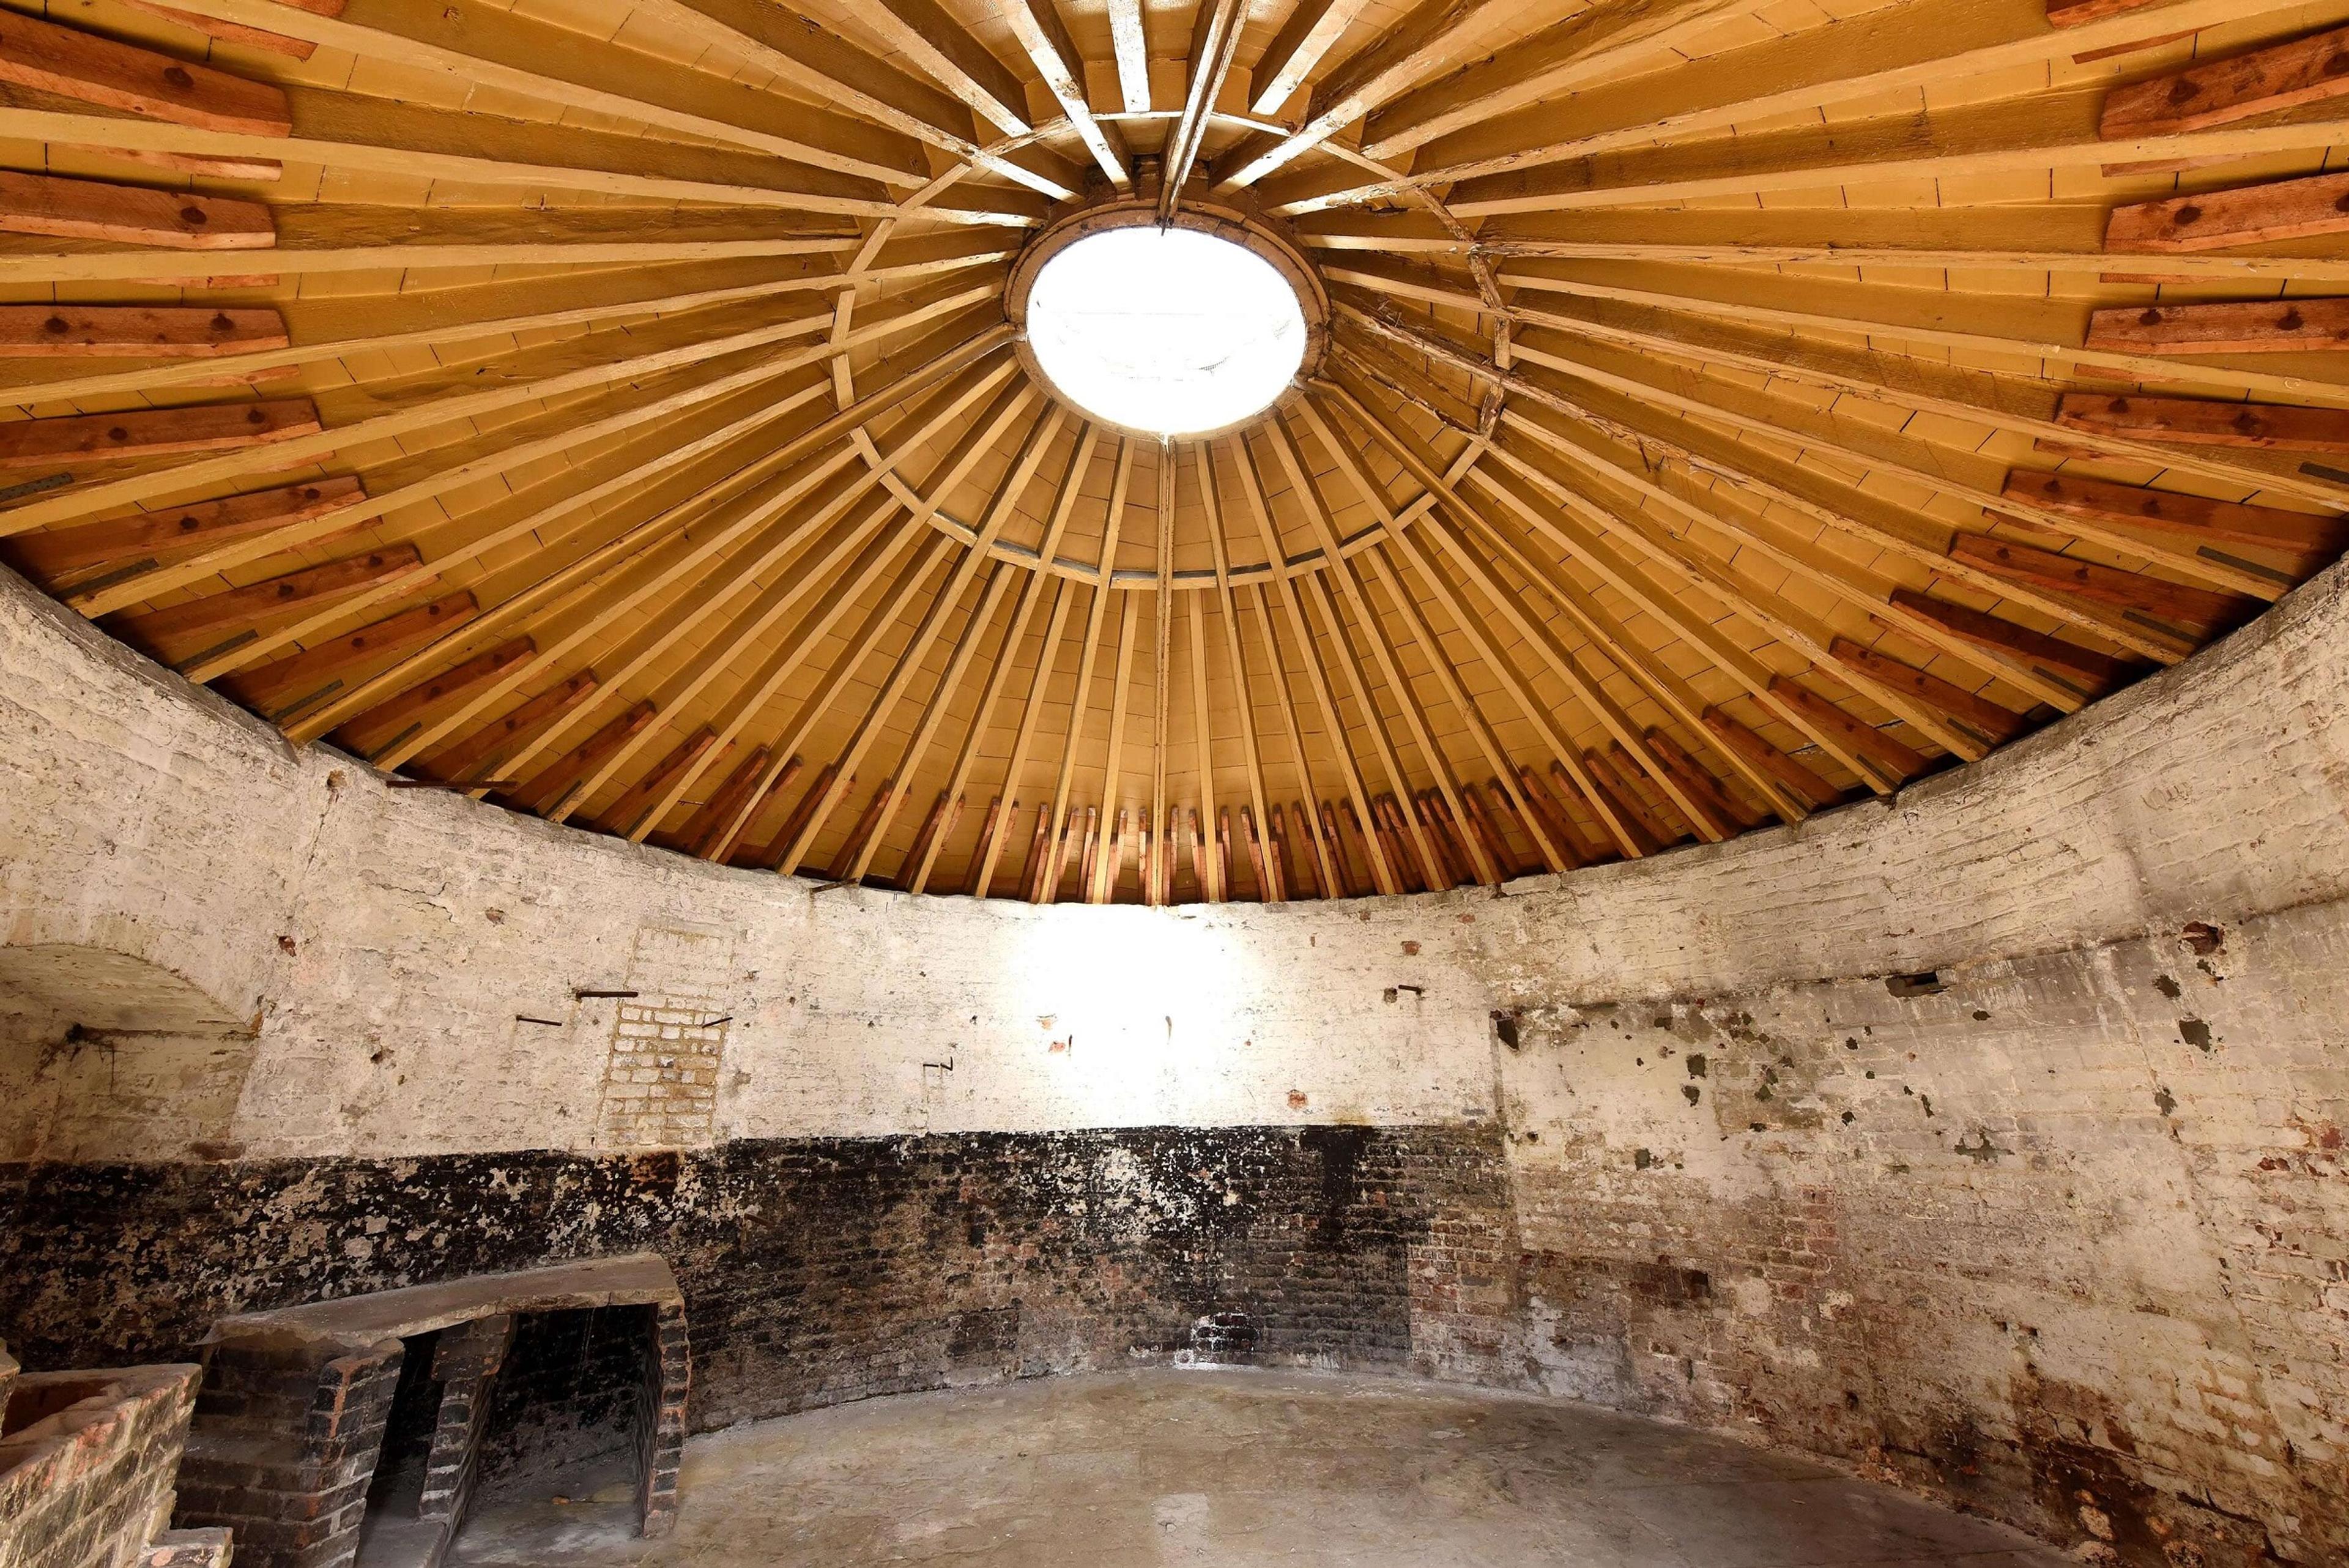 Interior of round brick building with conical roof and lantern